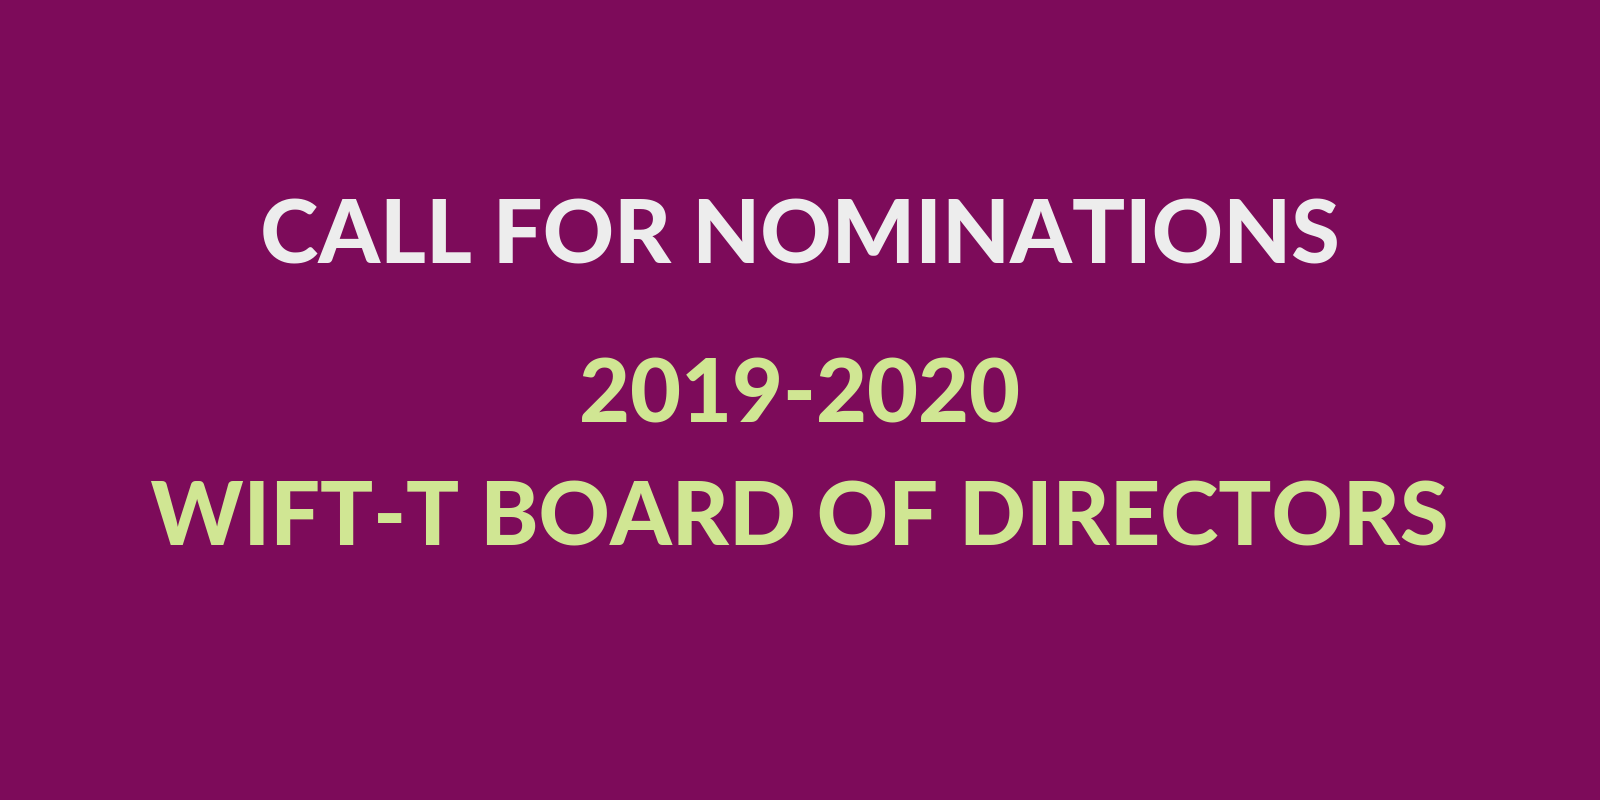 Call for nominations: 2019-2020 WIFT-T Board of Directors